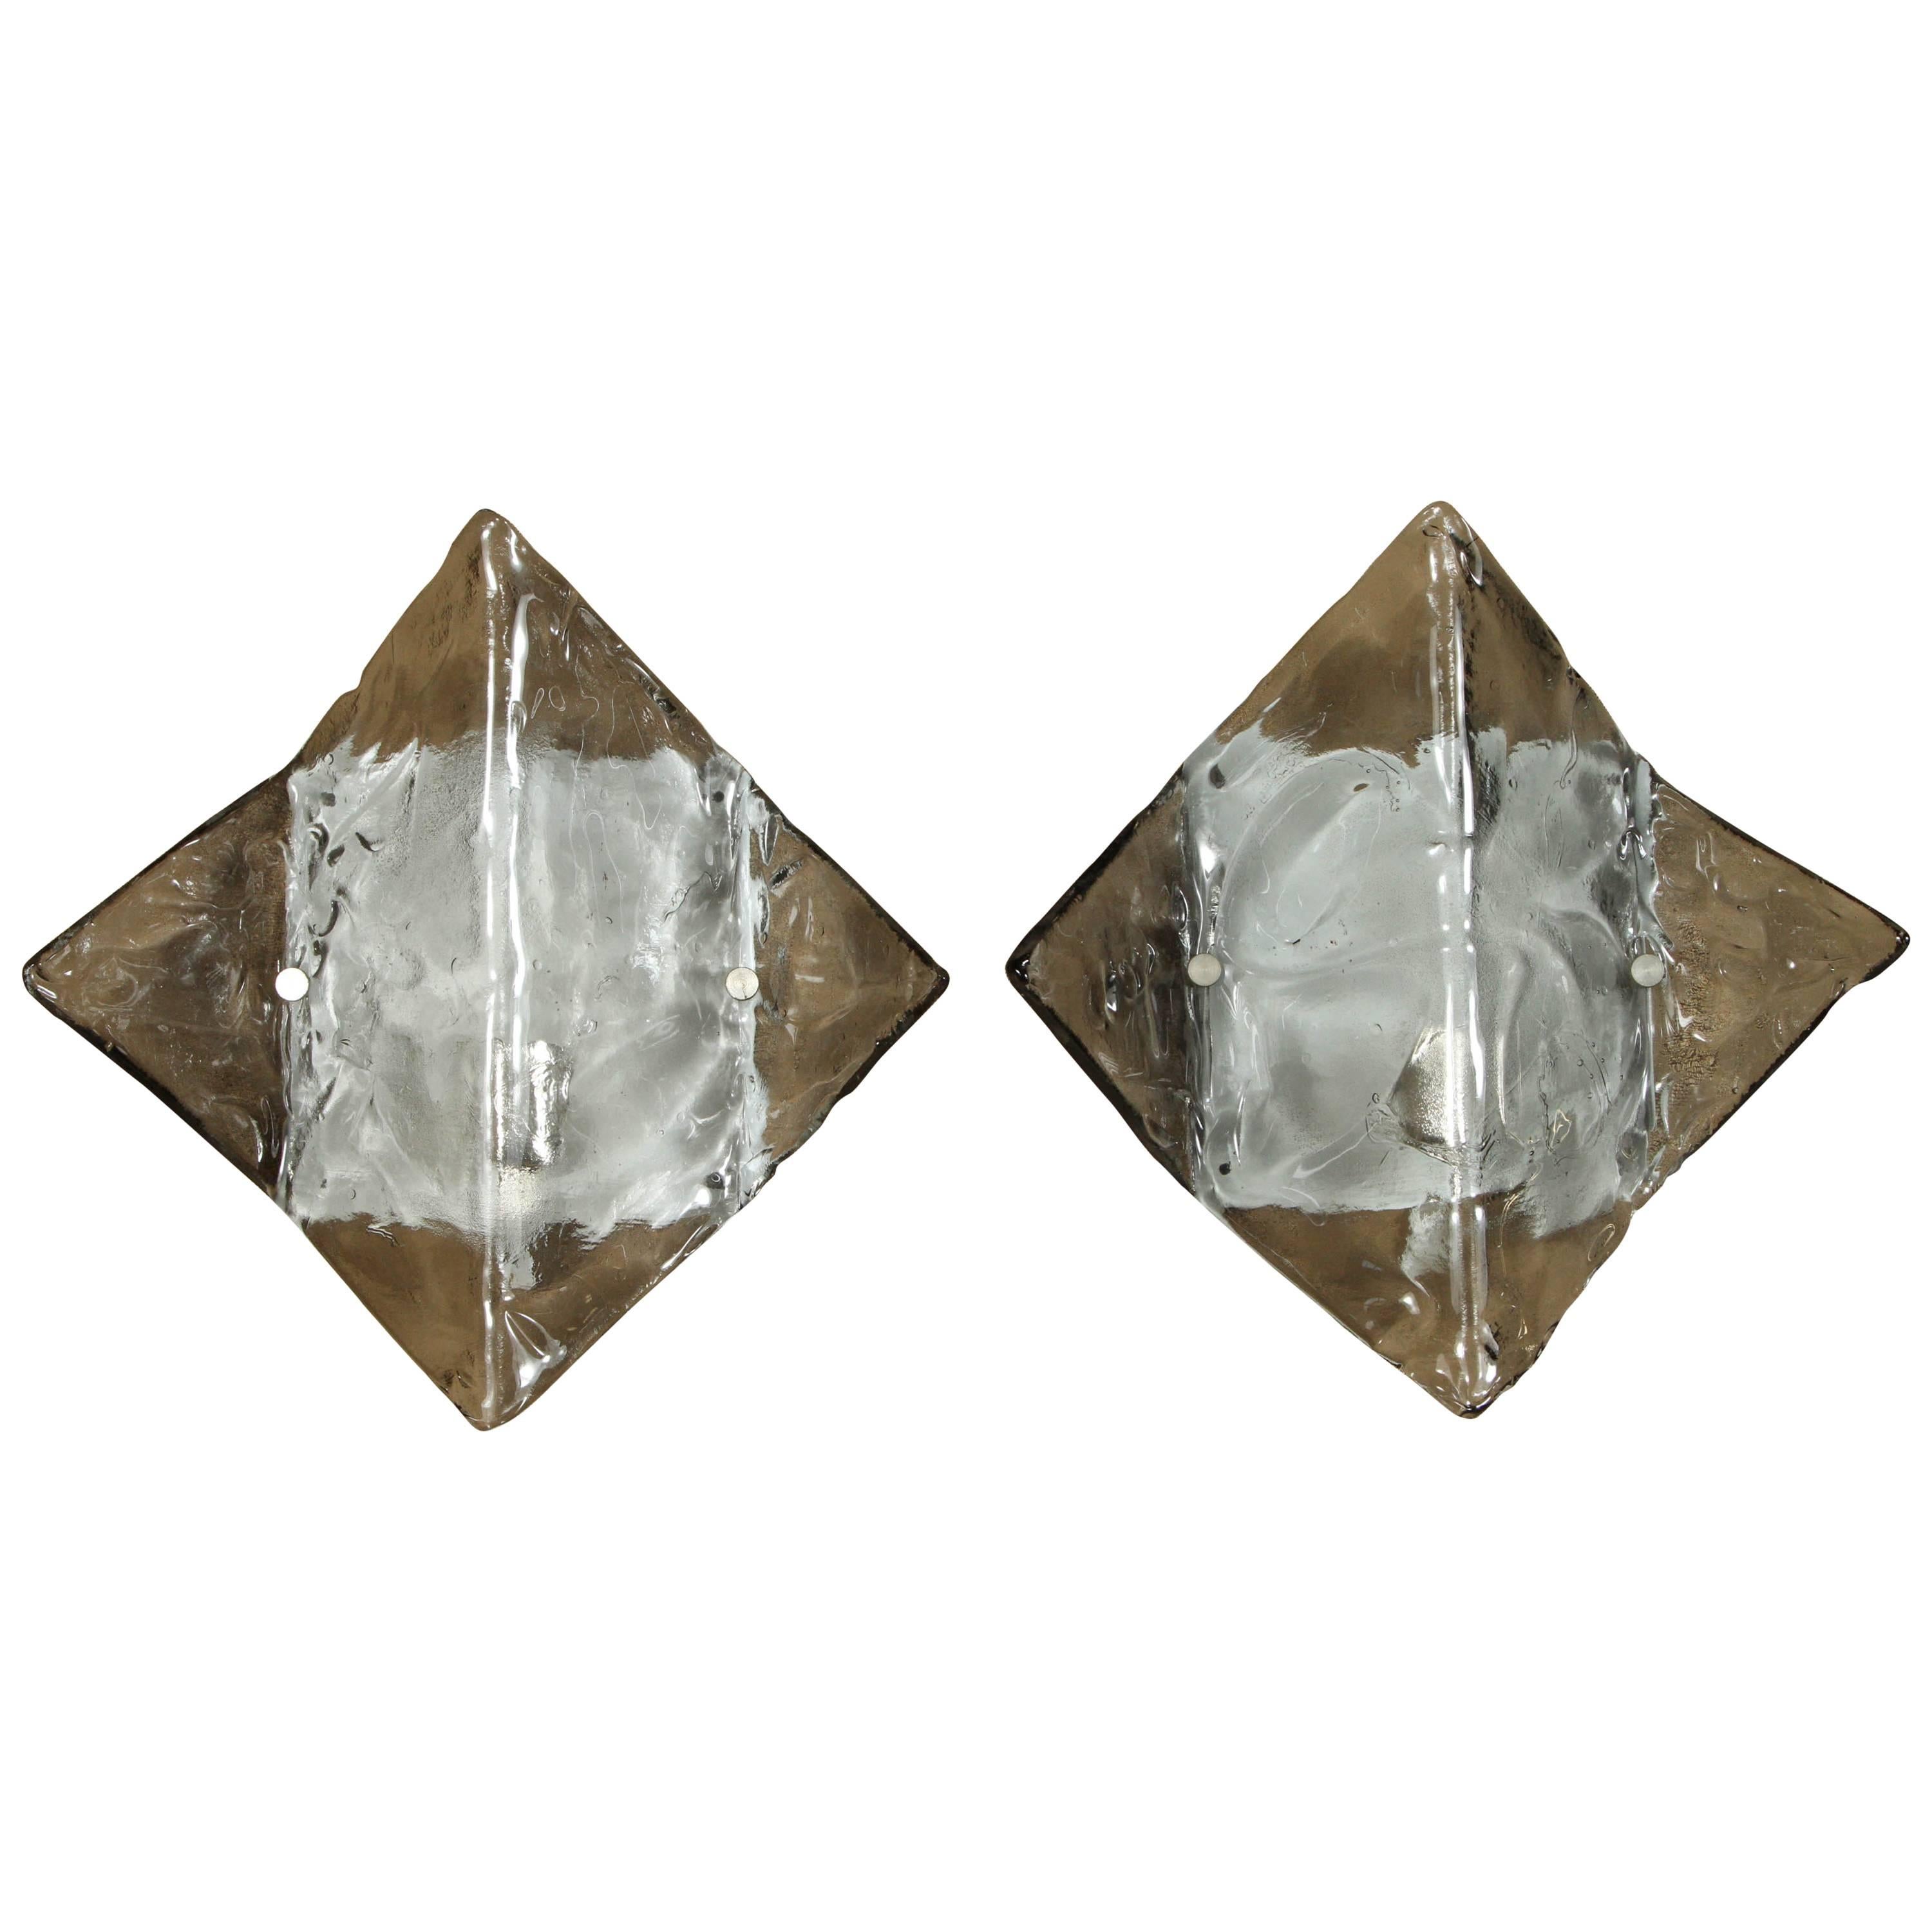 Pair of Stunning Wall Sconces by Mazzega